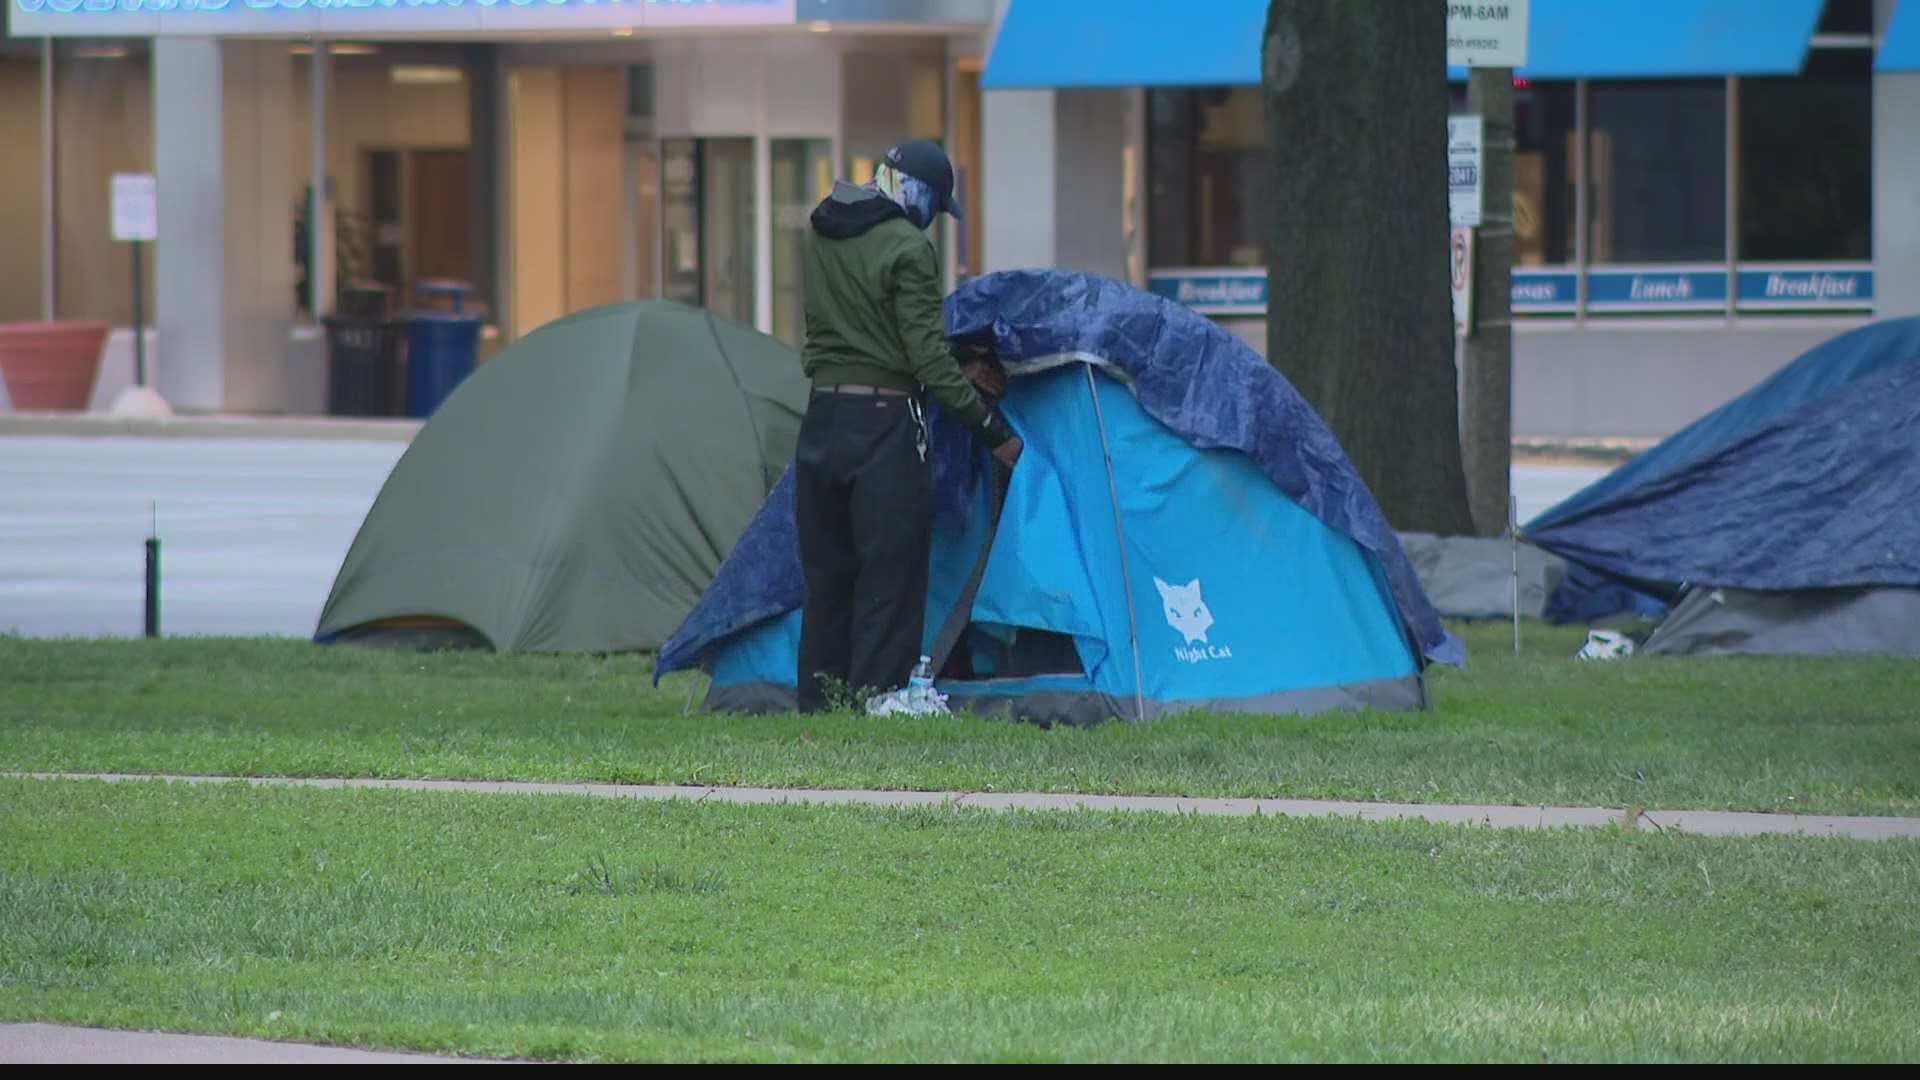 People living in the encampment are hoping a federal judge will step in to let them stay.